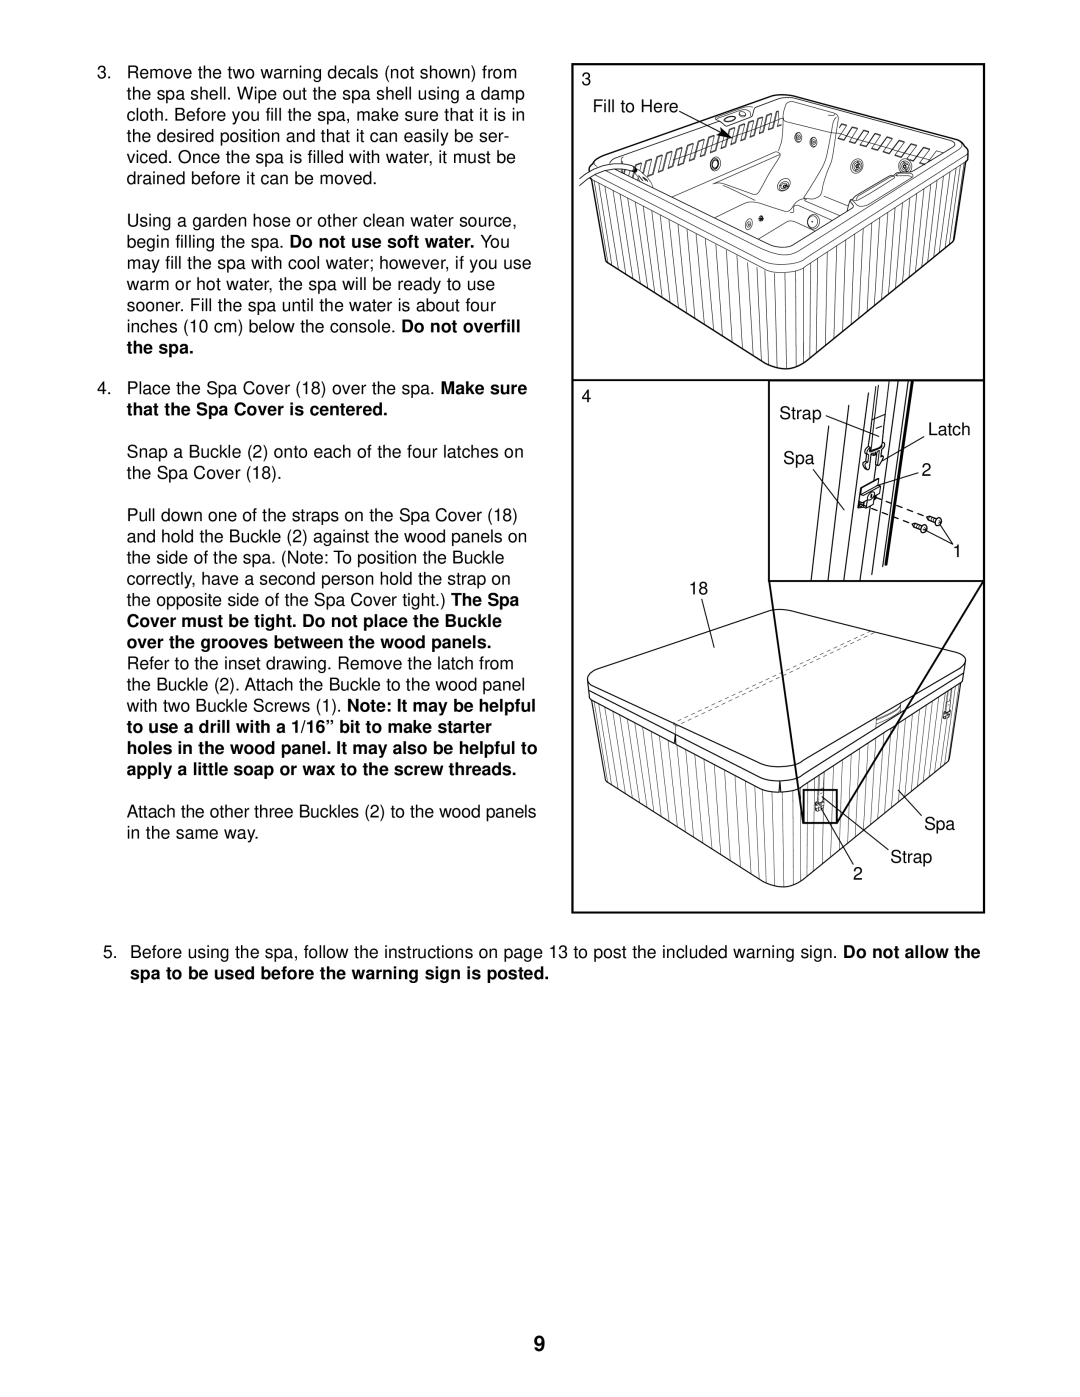 Sears 831.105021 user manual Do not overfill, the spa, spa to be used before the warning sign is posted 